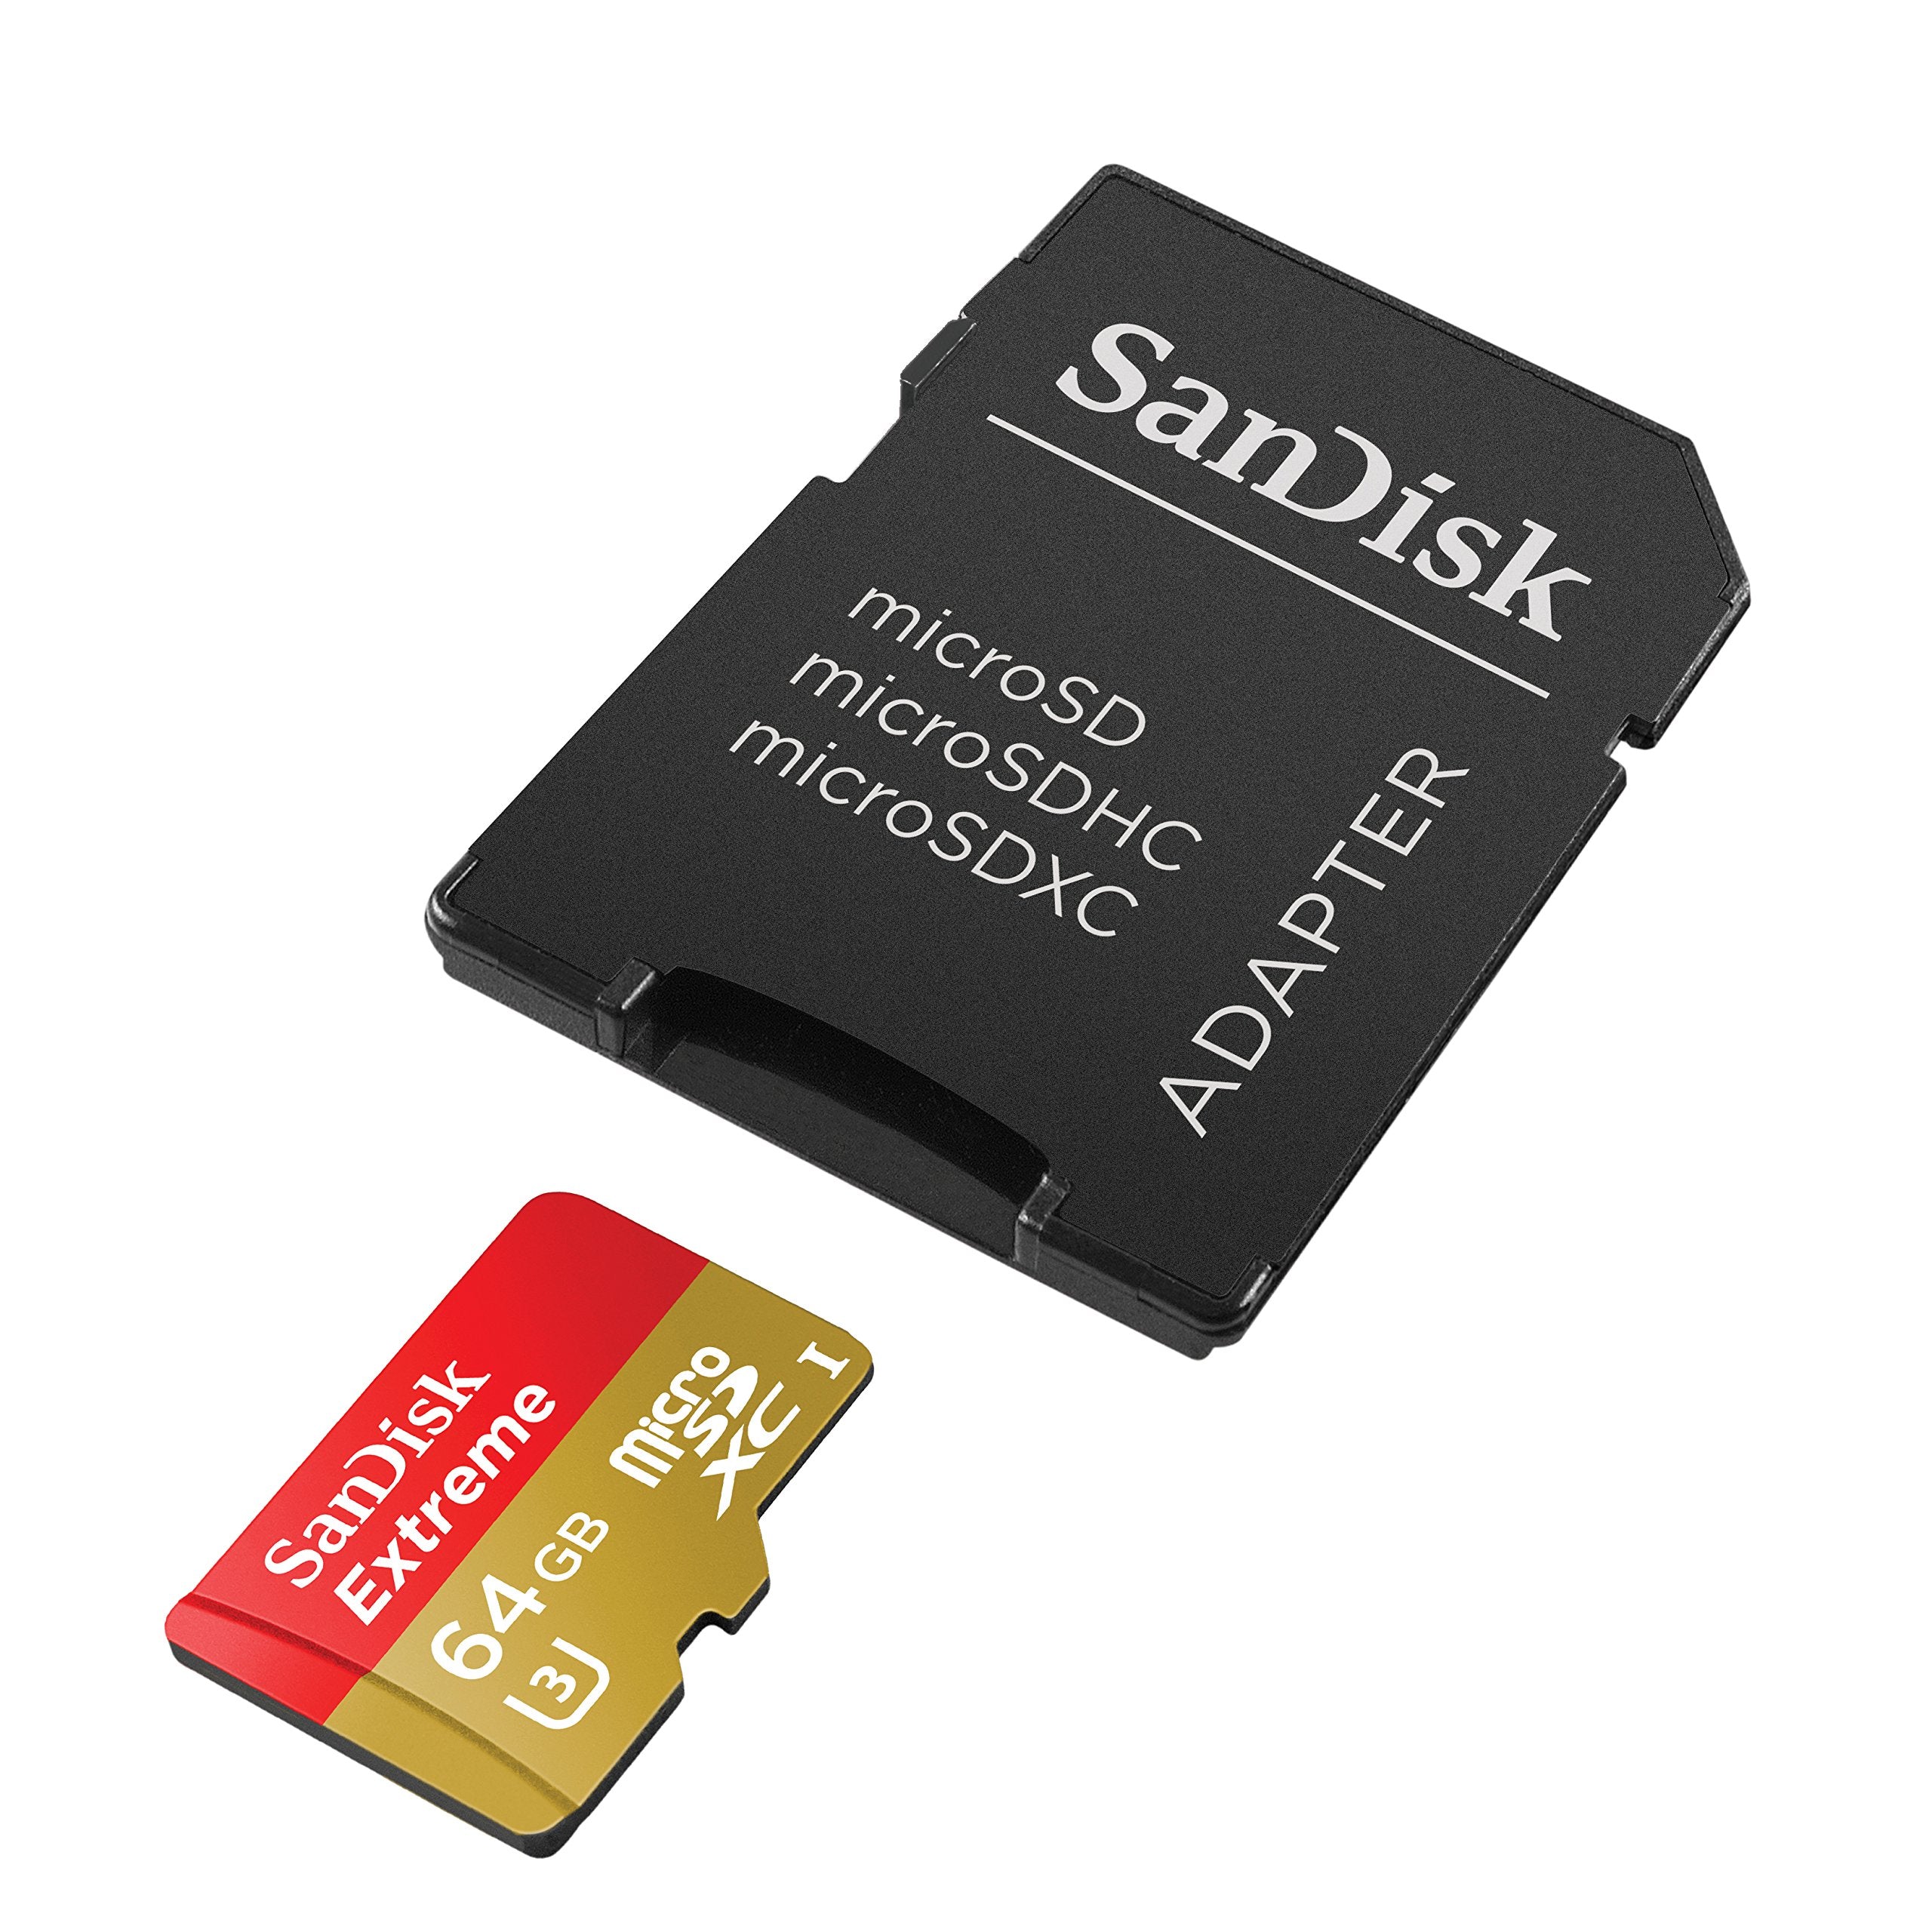 SanDisk Extreme 64GB microSDXC UHS-I Card with Adapter (SDSQXNE-064G-GN6MA)